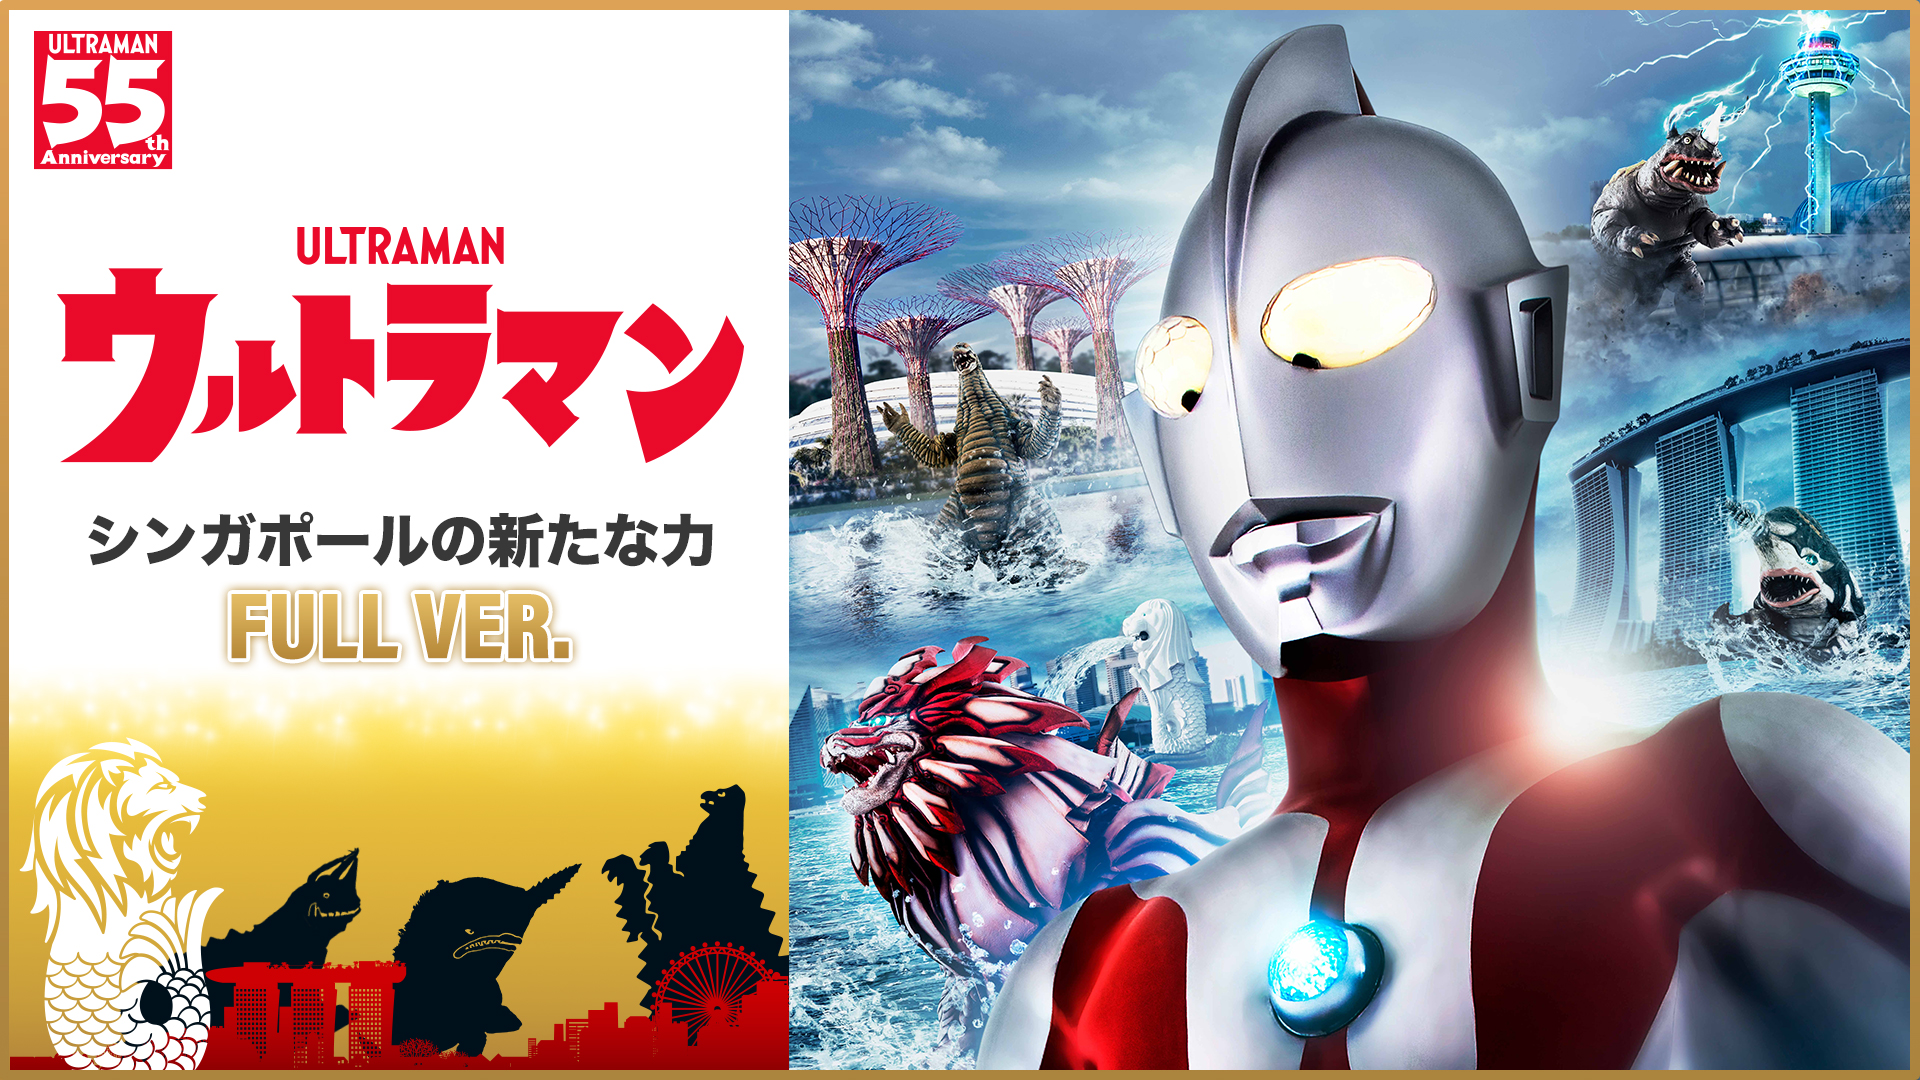 Ultraman: A New Power of Singapore Now Streaming